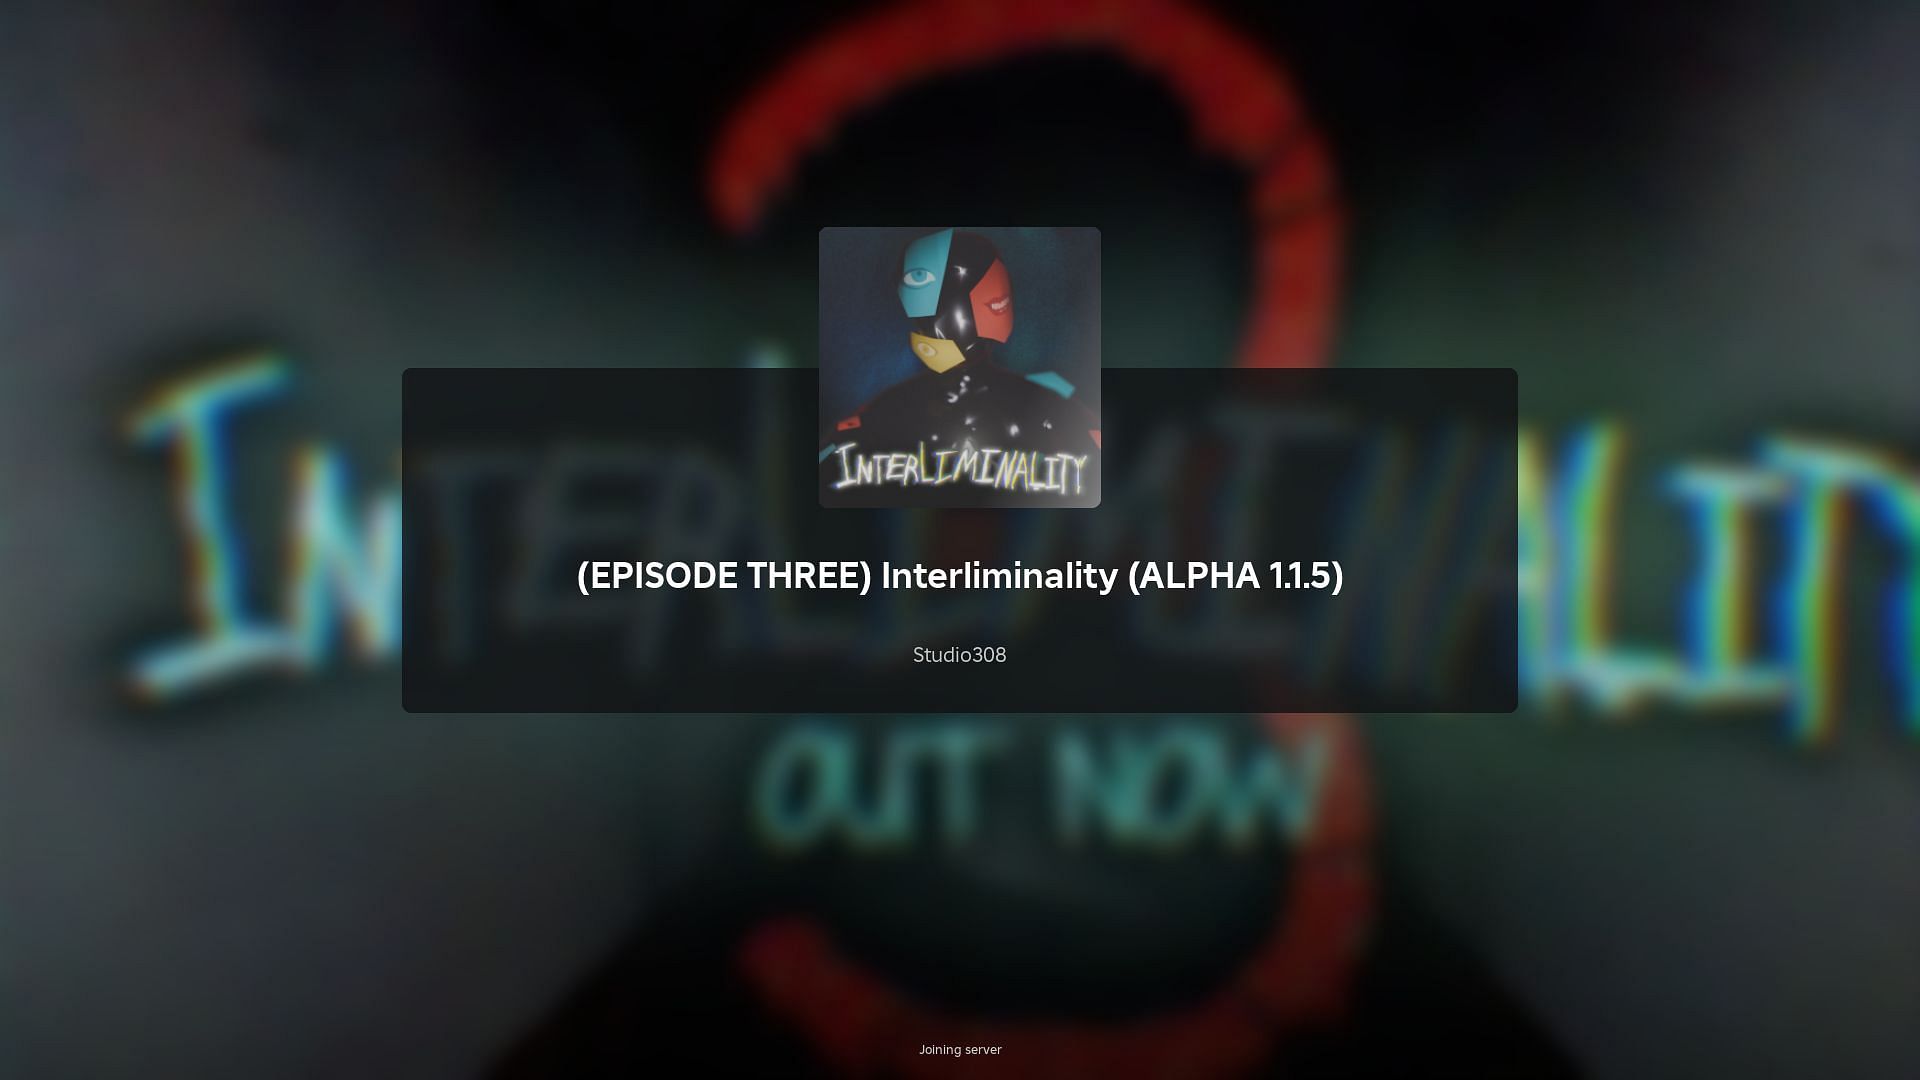 A guide to the third episode for Interliminality